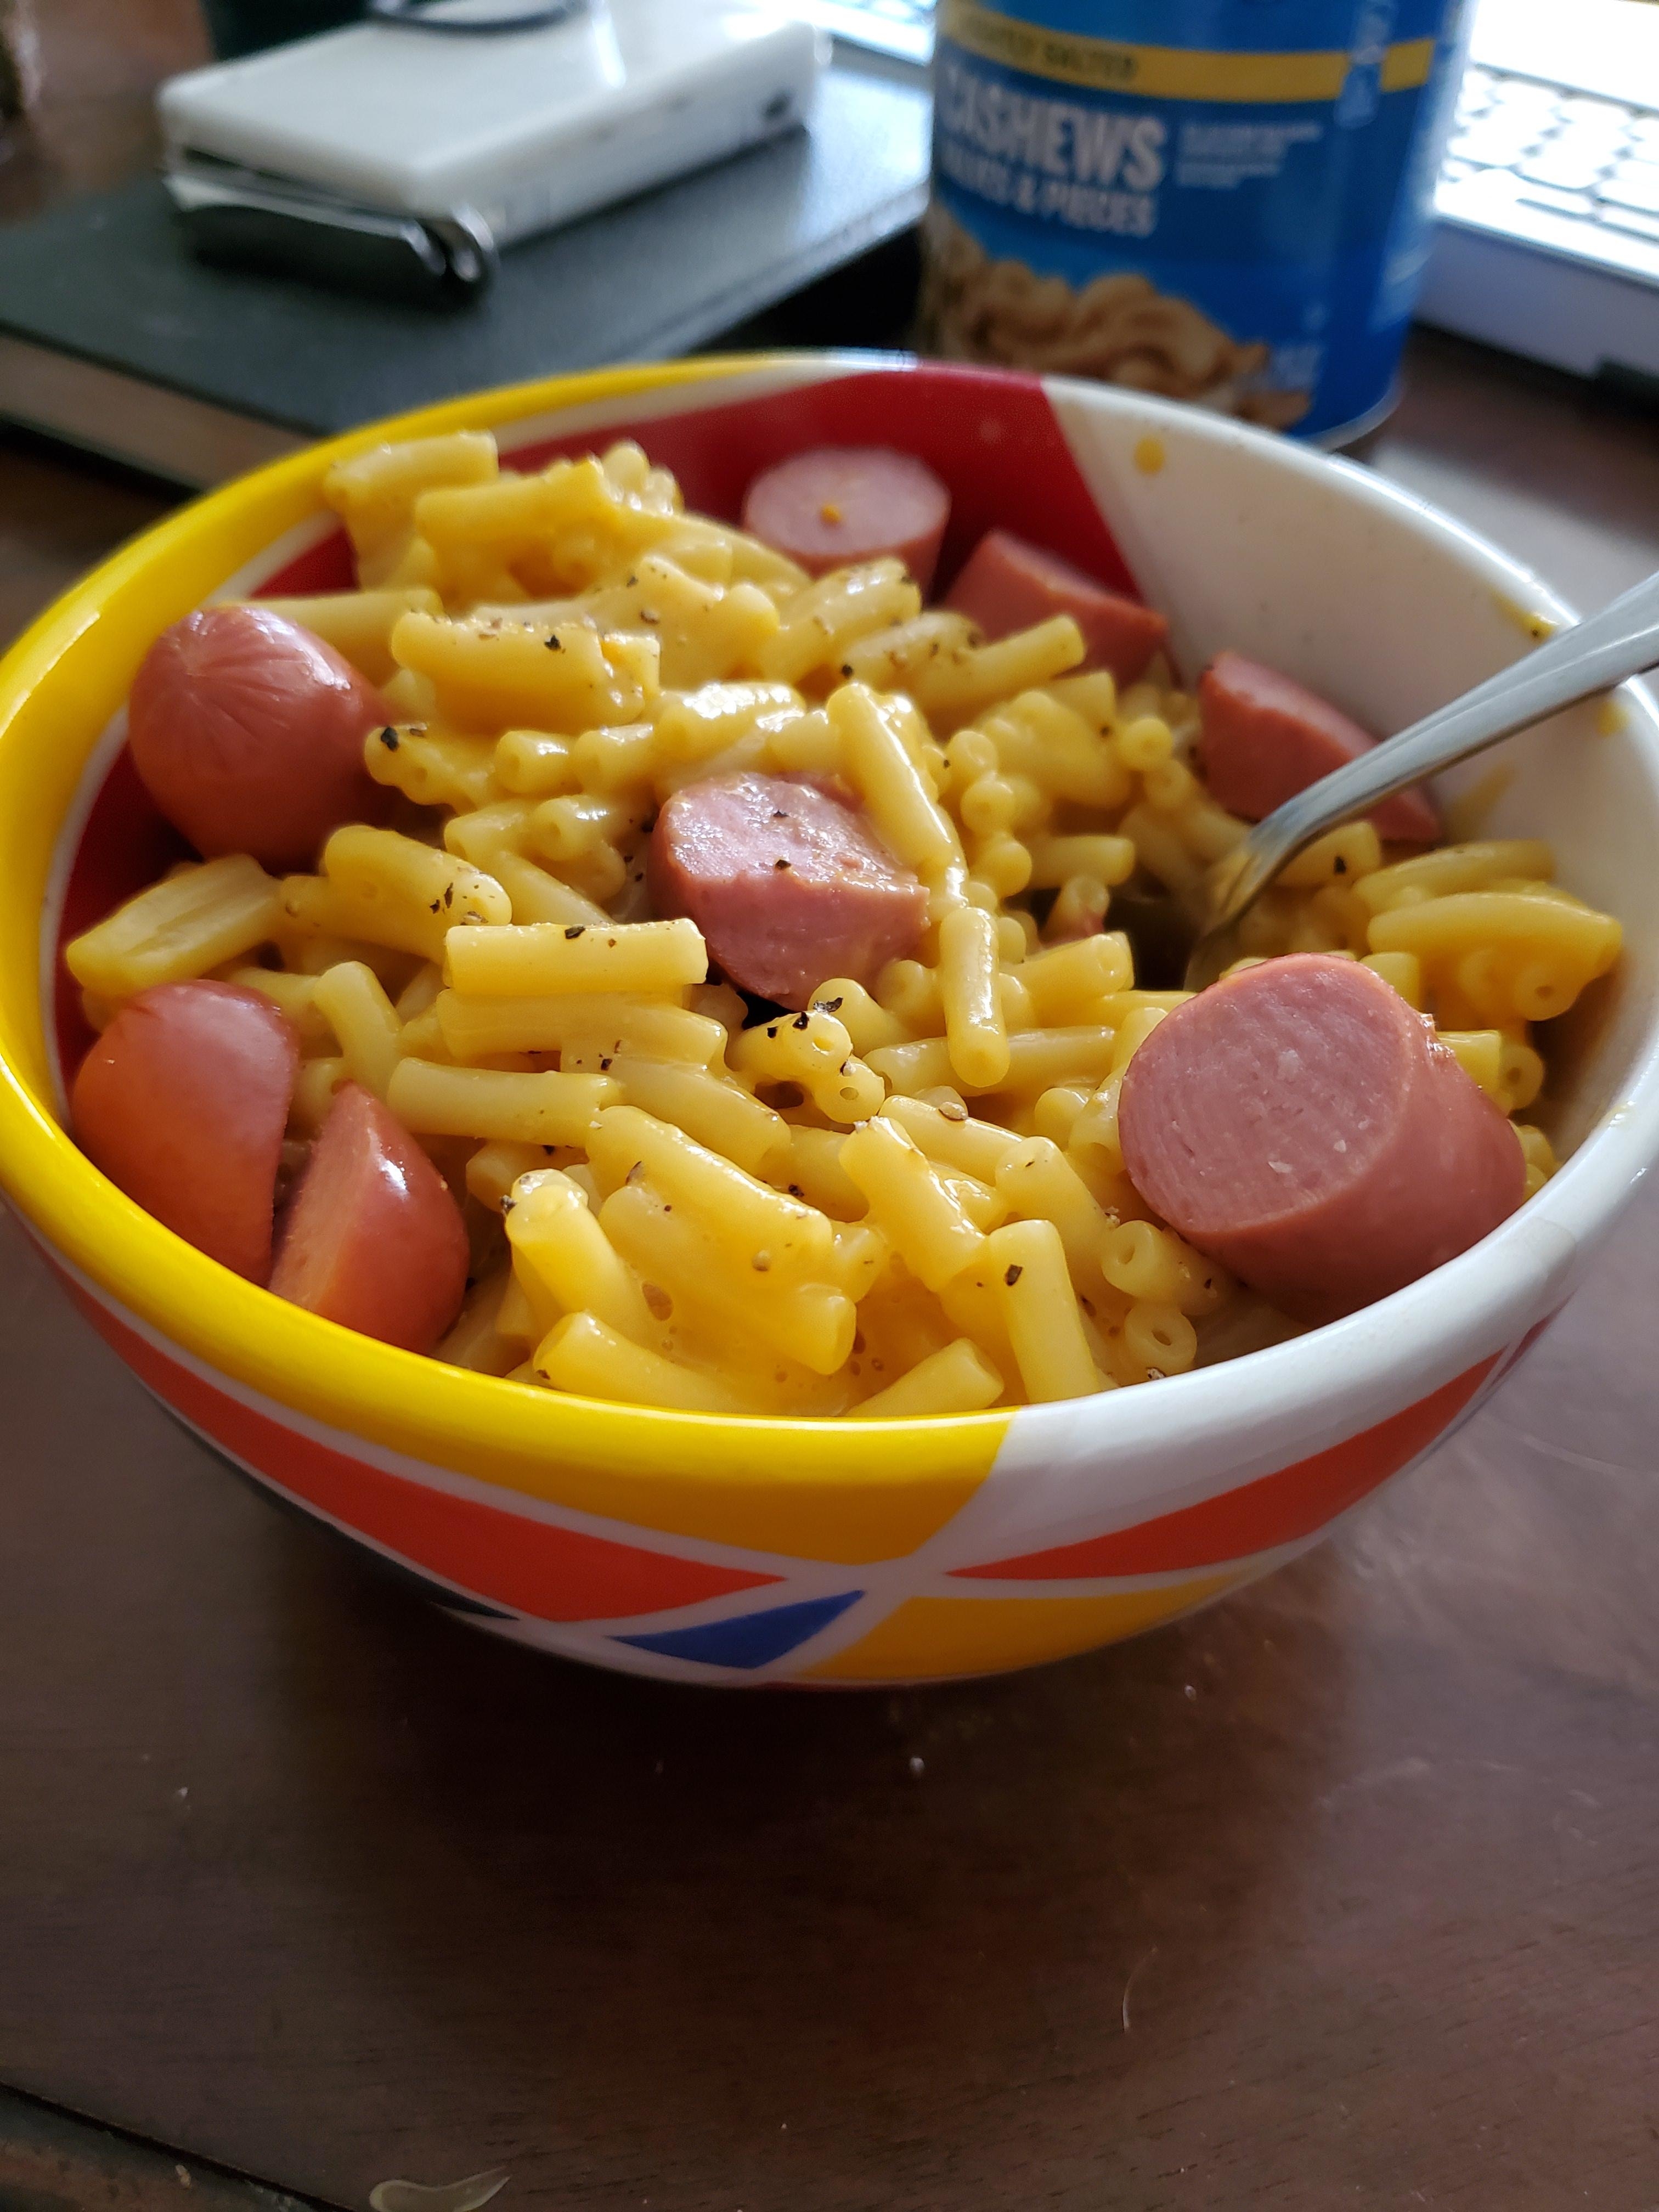 A bowl of macaroni and cheese with sliced hot dogs mixed in, on a table next to a can of cashews